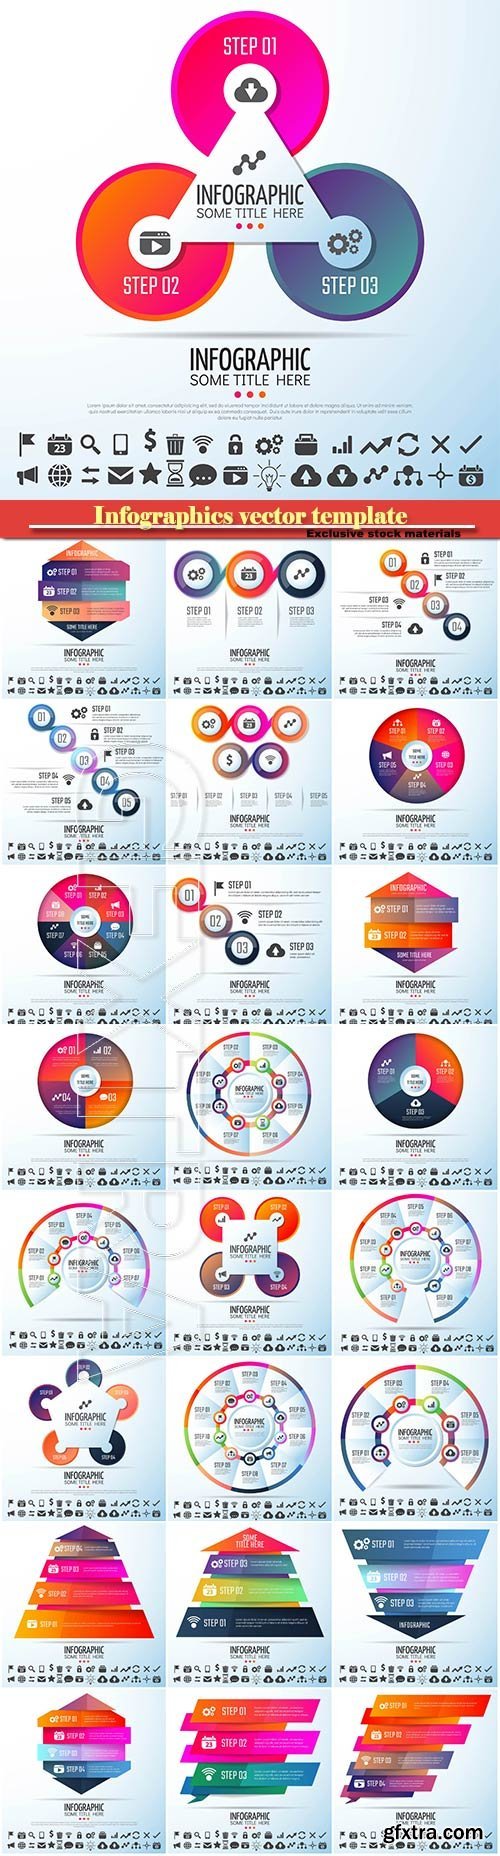 Infographics vector template for business presentations or information banner